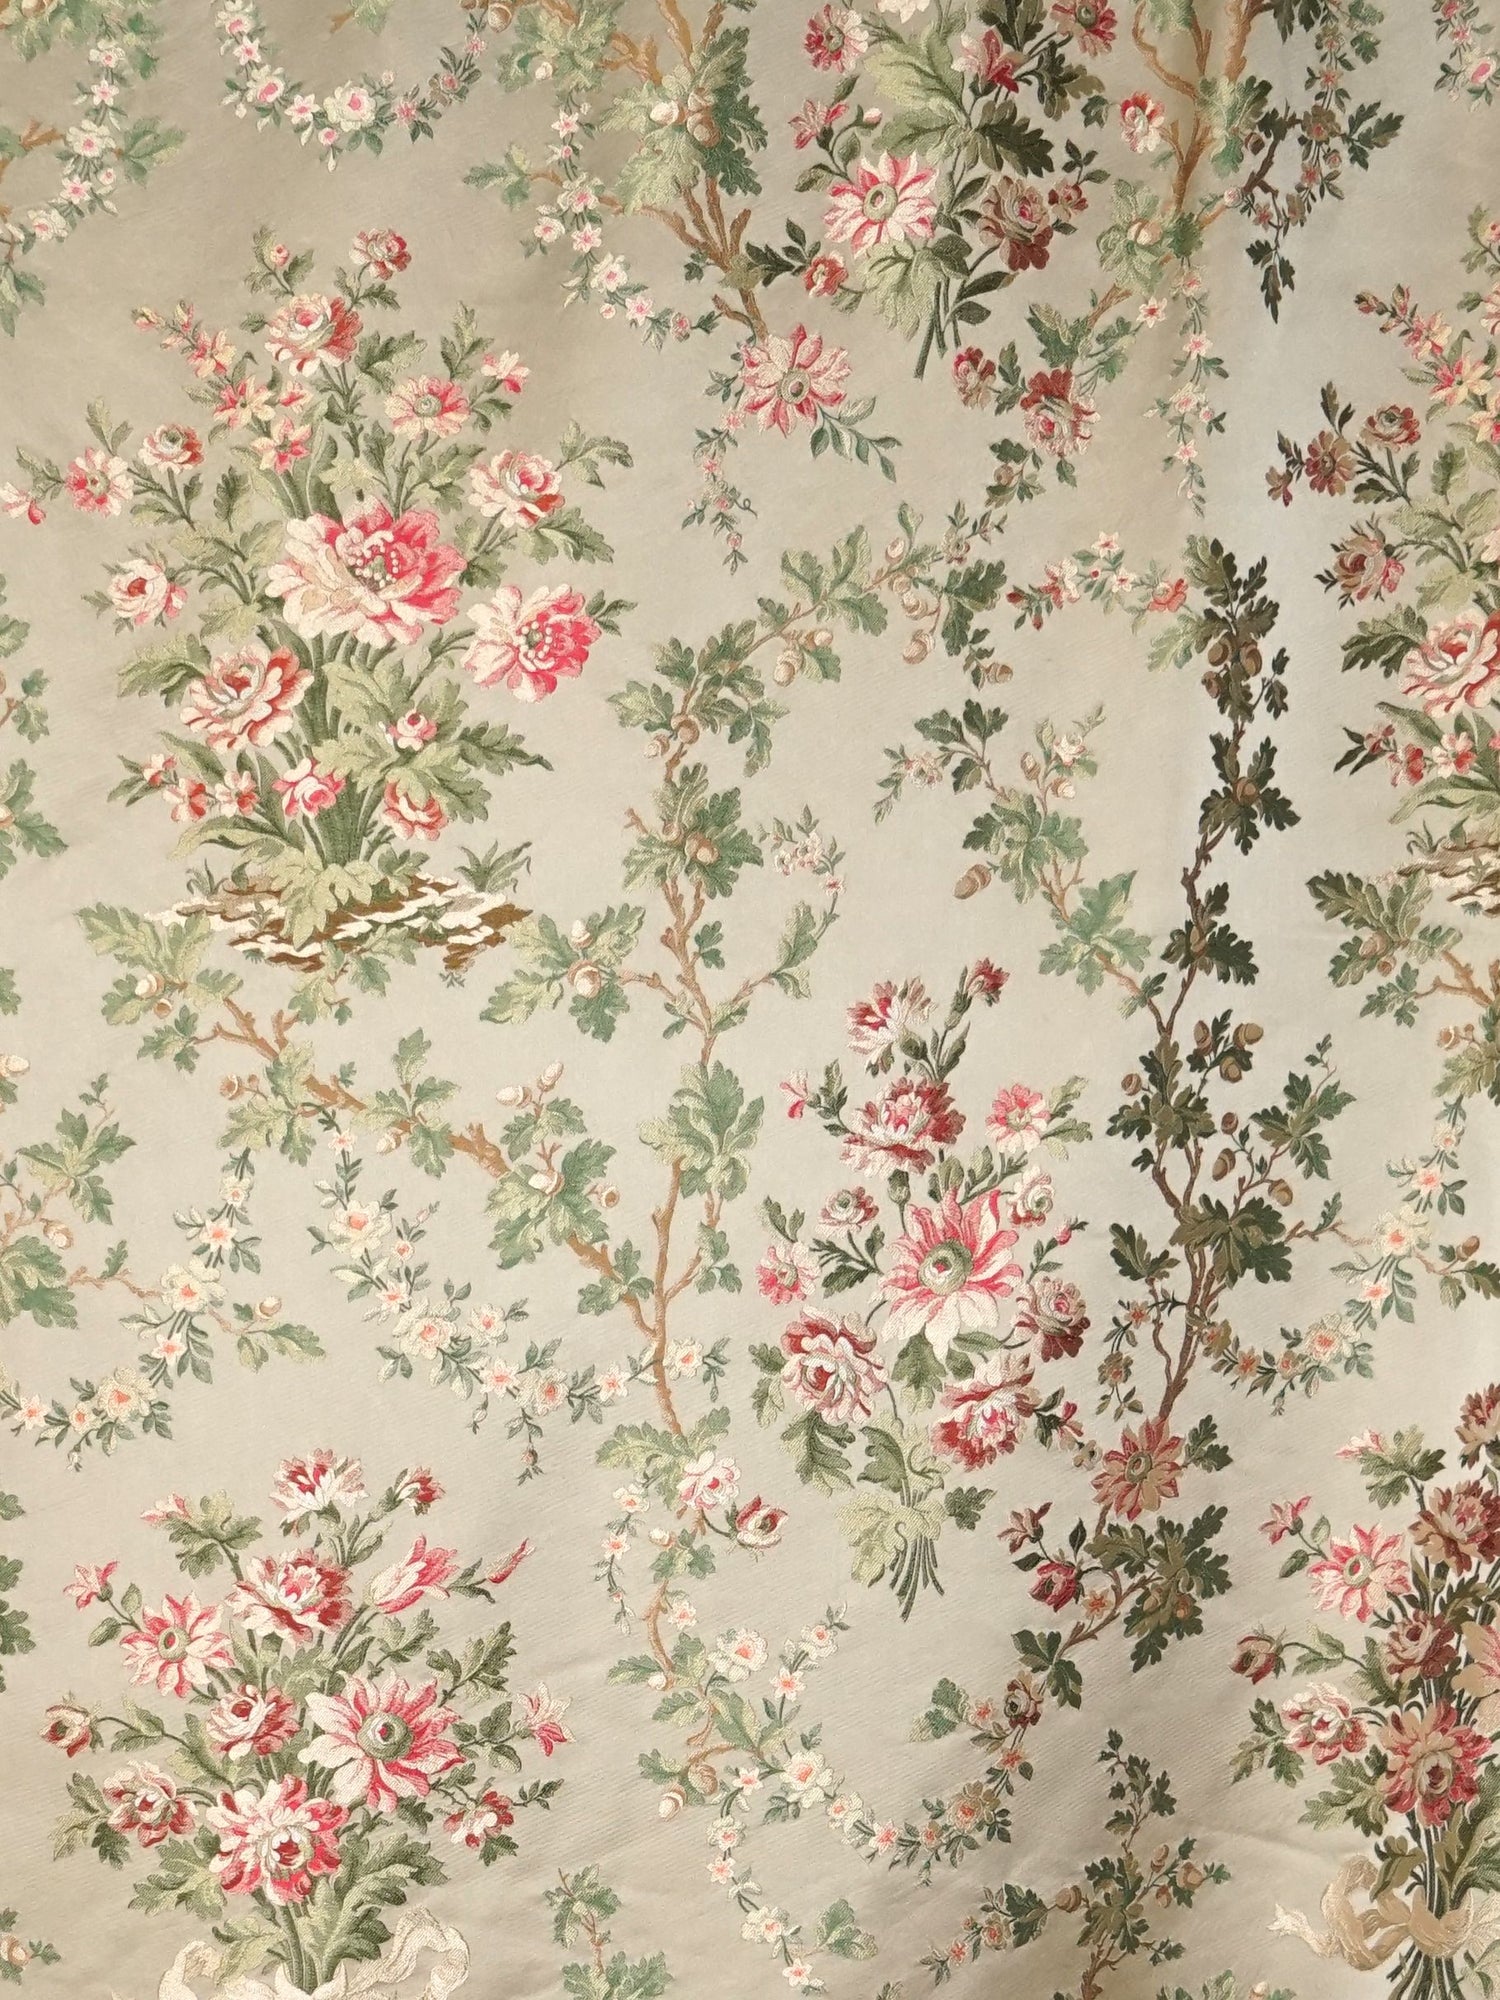 La Belle Jardiniere fabric in cream rose color - pattern number SB 00112866 - by Scalamandre in the Old World Weavers collection